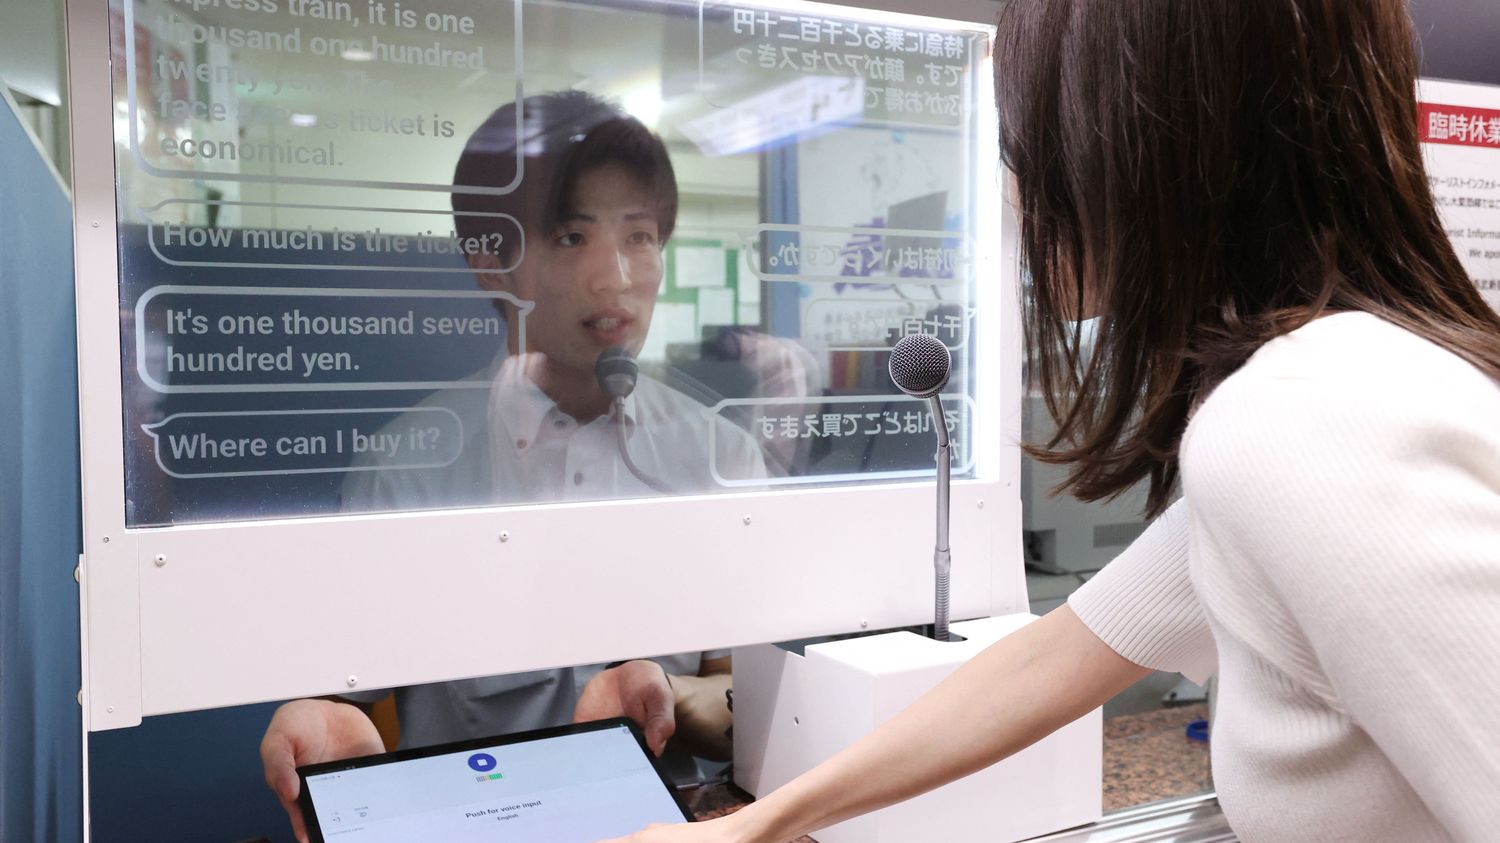 Japan: instant translation windows for tourists in train stations and airports